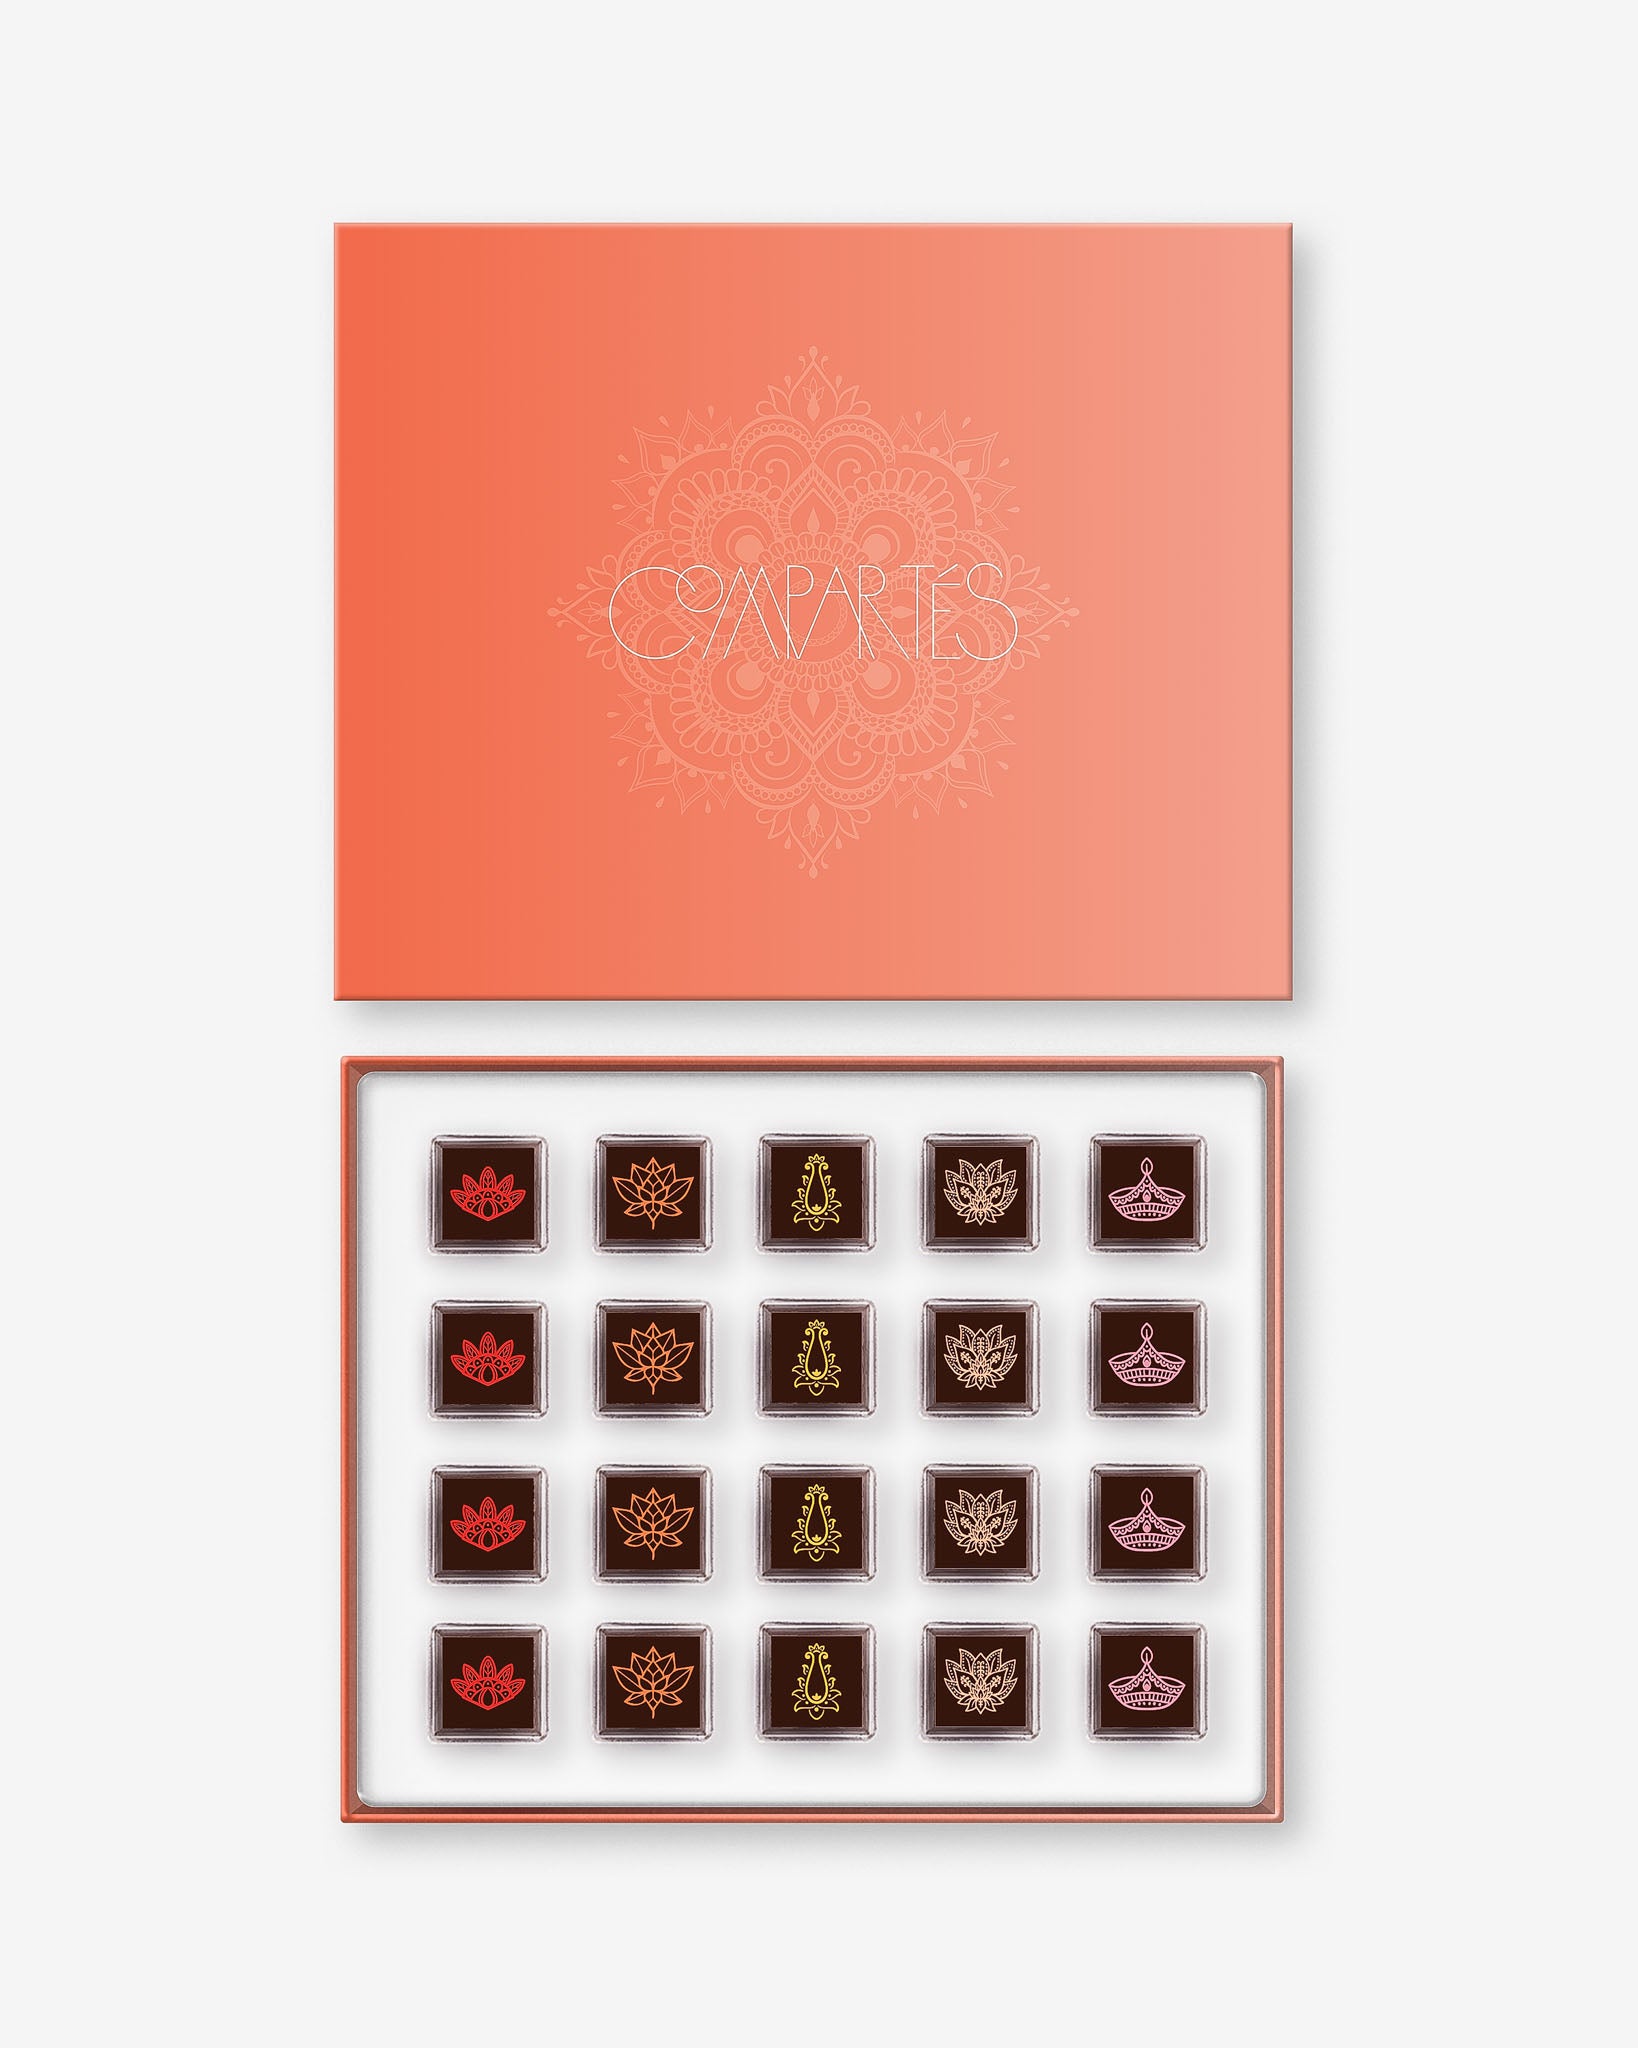 Diwali Chocolate Gift Box - Limited Edition Flavors